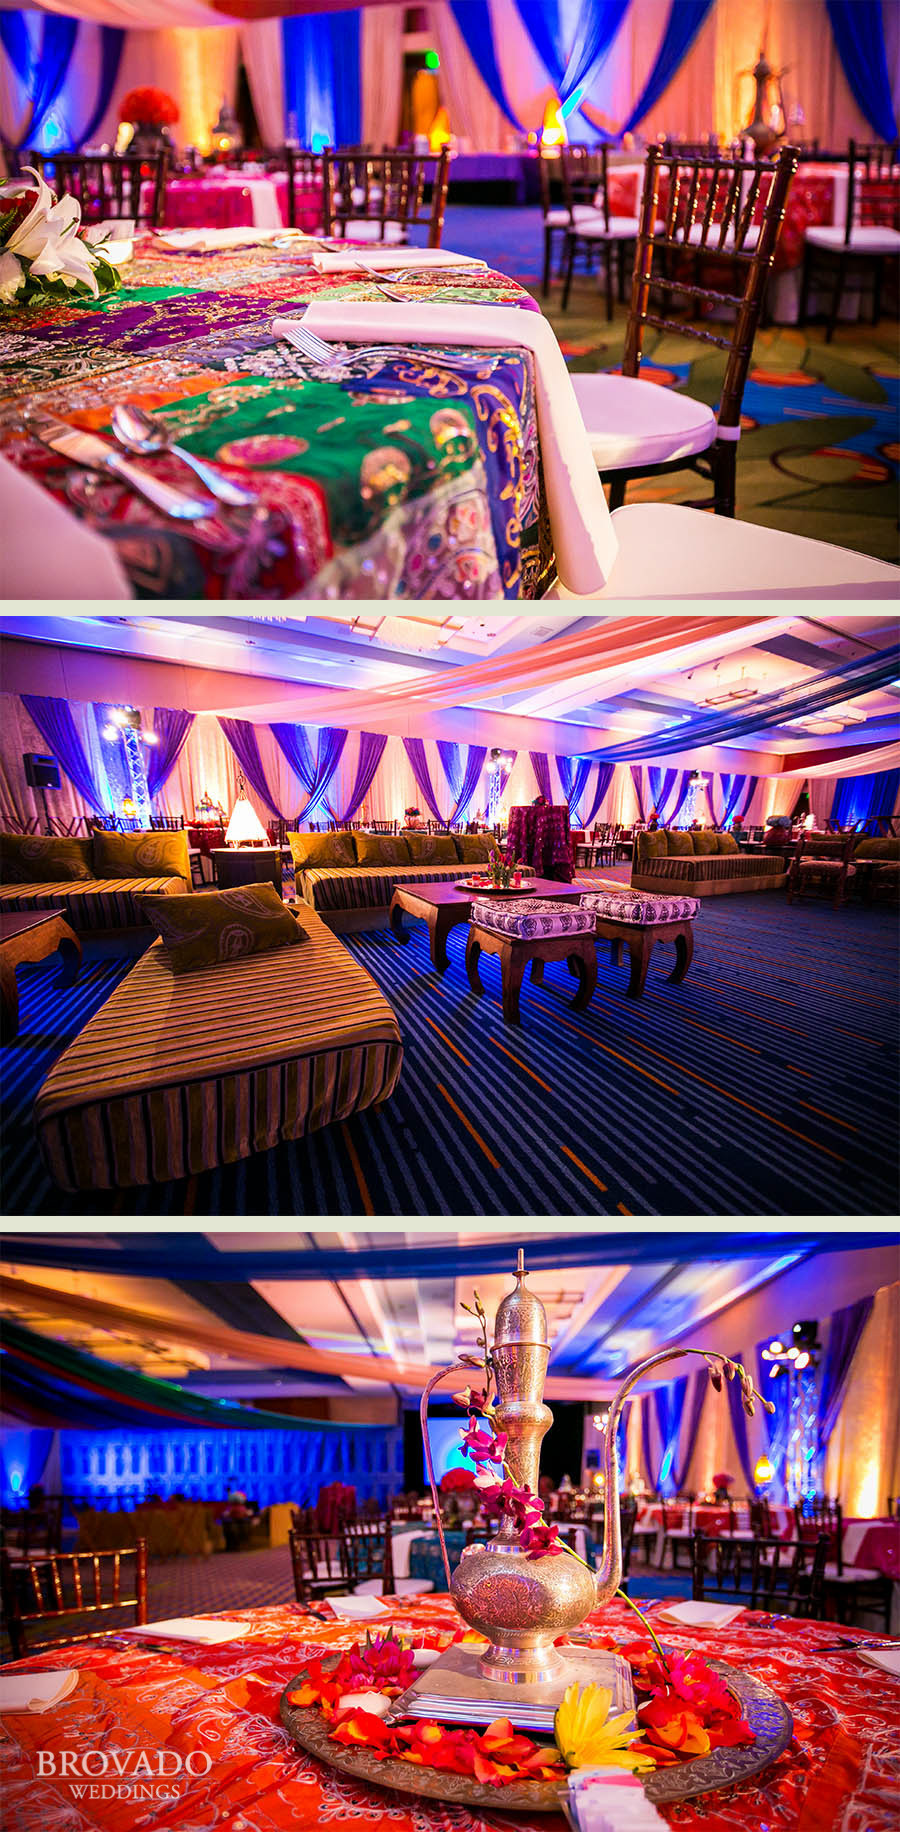 Indian Engagement Party Ideas
 The Hussain s Surprise 25th Anniversary Party